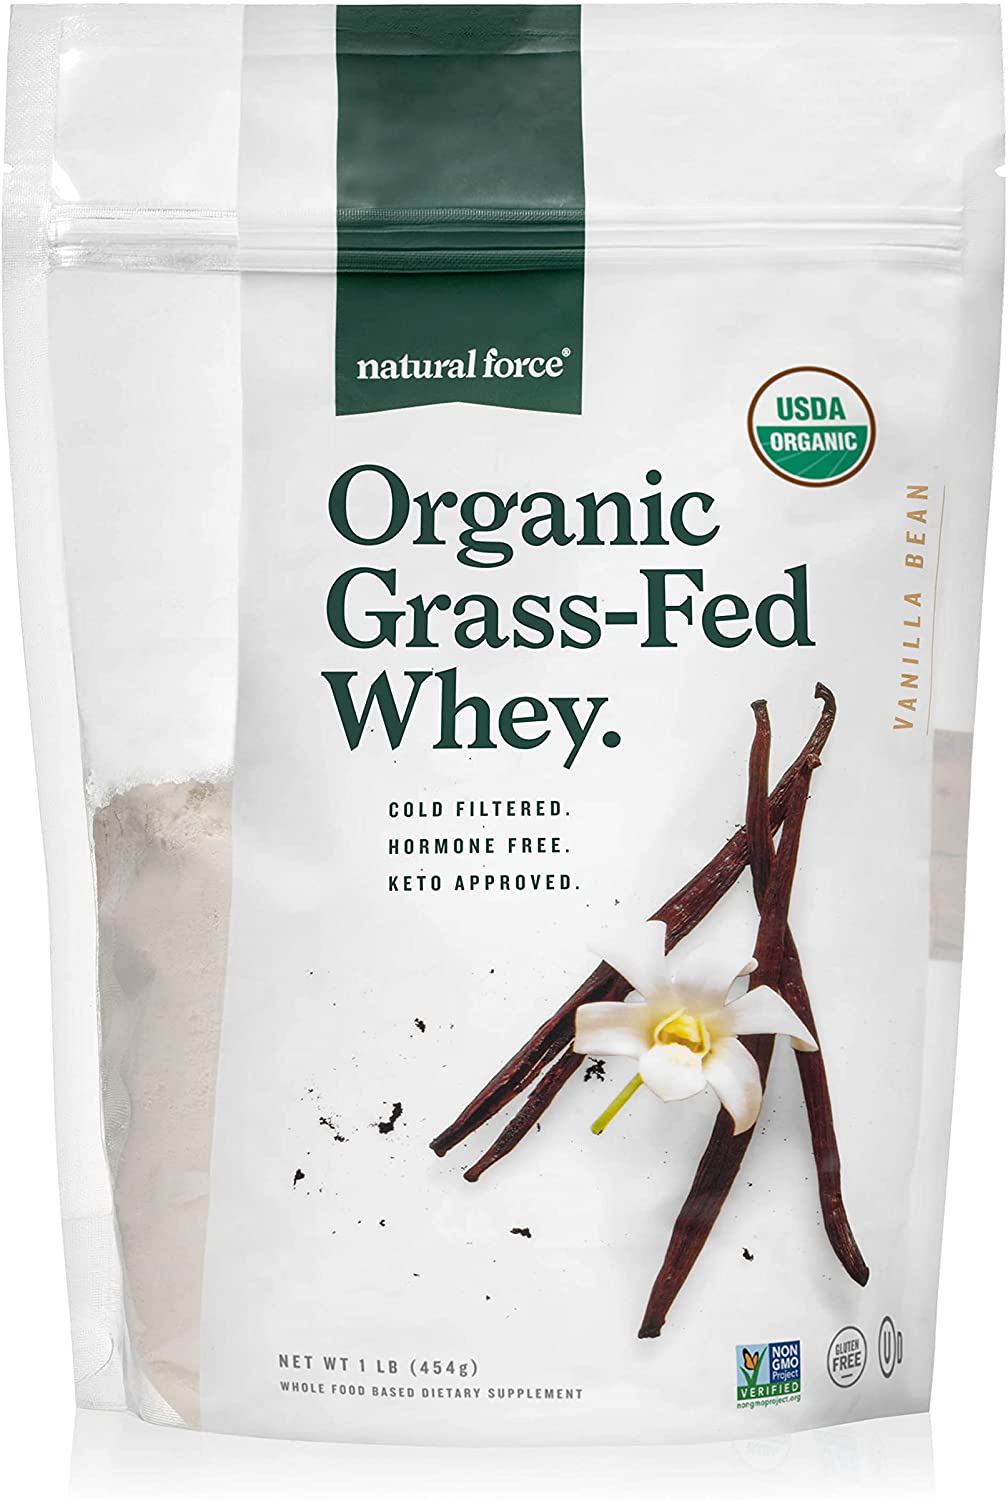 natural force organic whey